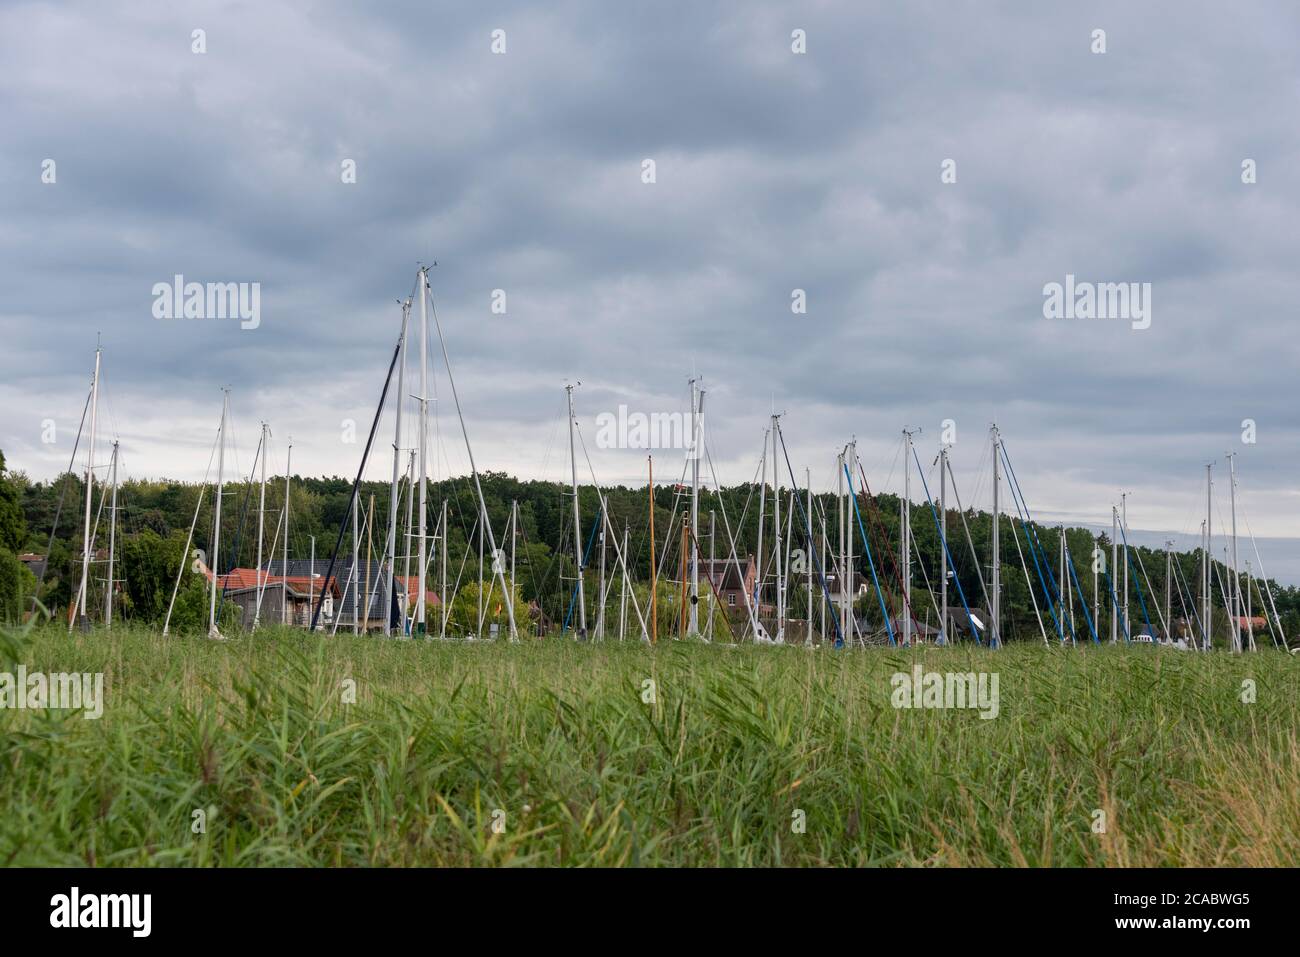 Seedorf, Germany. 02nd Aug, 2020. Behind a belt of reeds you can see the masts of the sailing boats that have moored in the natural harbour. Seedorf was once the most important harbour on the island of Rügen. There was even a shipyard for seaworthy ships. Today the boats of well-off leisure skippers are moored at the pier. Credit: Stephan Schulz/dpa-Zentralbild/ZB/dpa/Alamy Live News Stock Photo